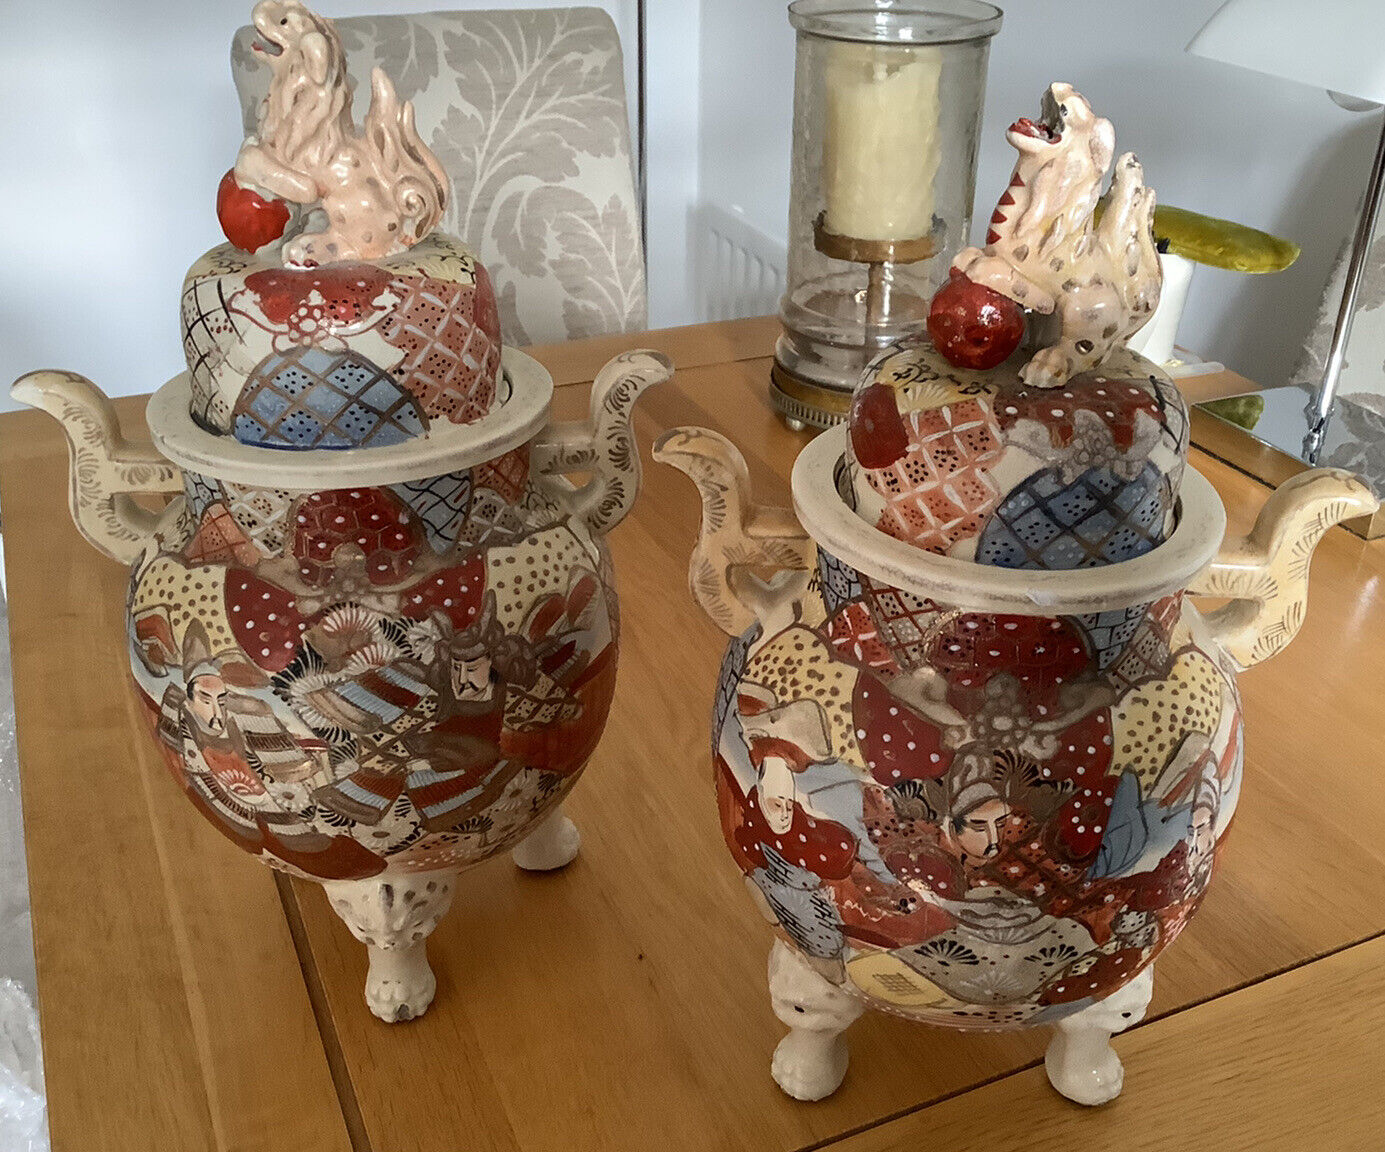 Antique Valuations: Pair of Antique Satsuma 3 Legged Urns with Foo Dog Top